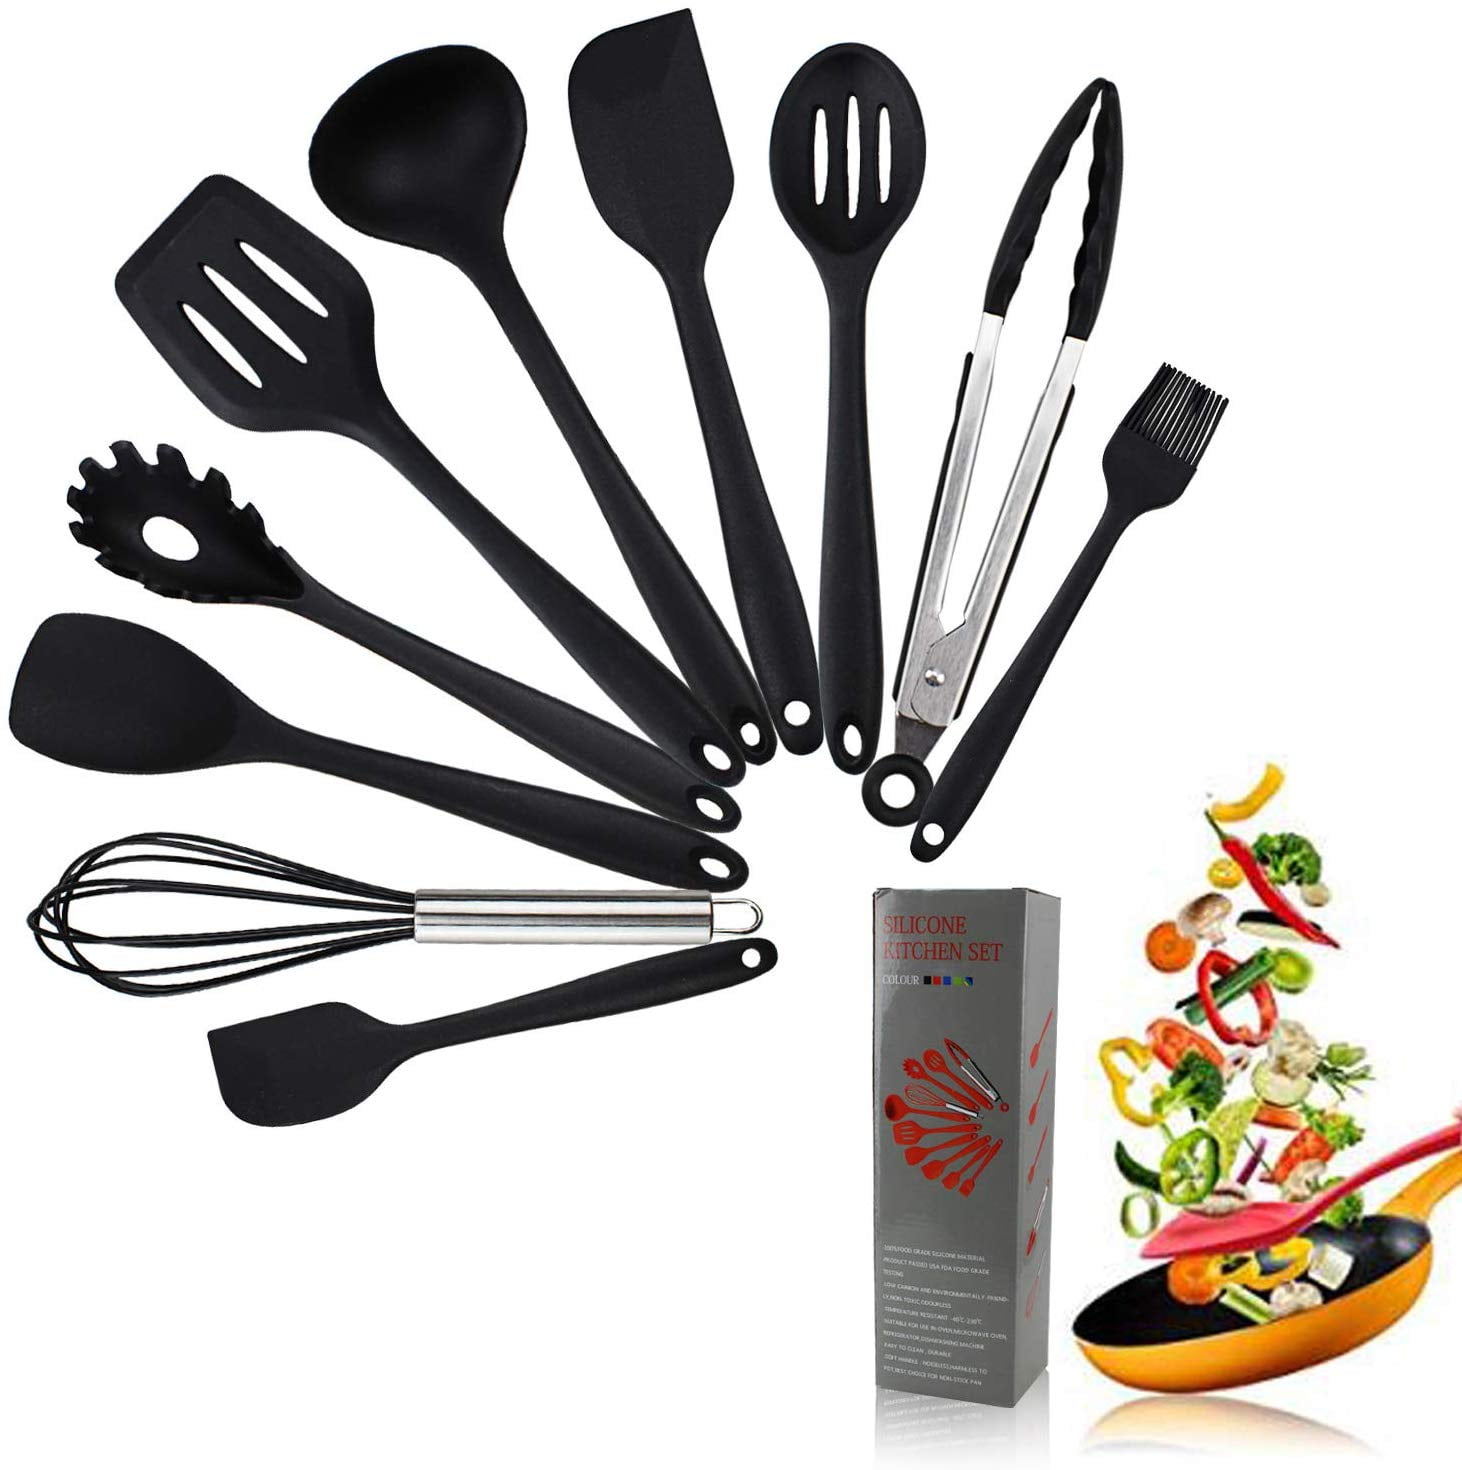 Kaluns Kitchen Utensils Set, 24 Piece Nylon and Stainless Steel Cooking  Utensils, Dishwasher Safe and Heat Resistant Kitchen Tools, Red